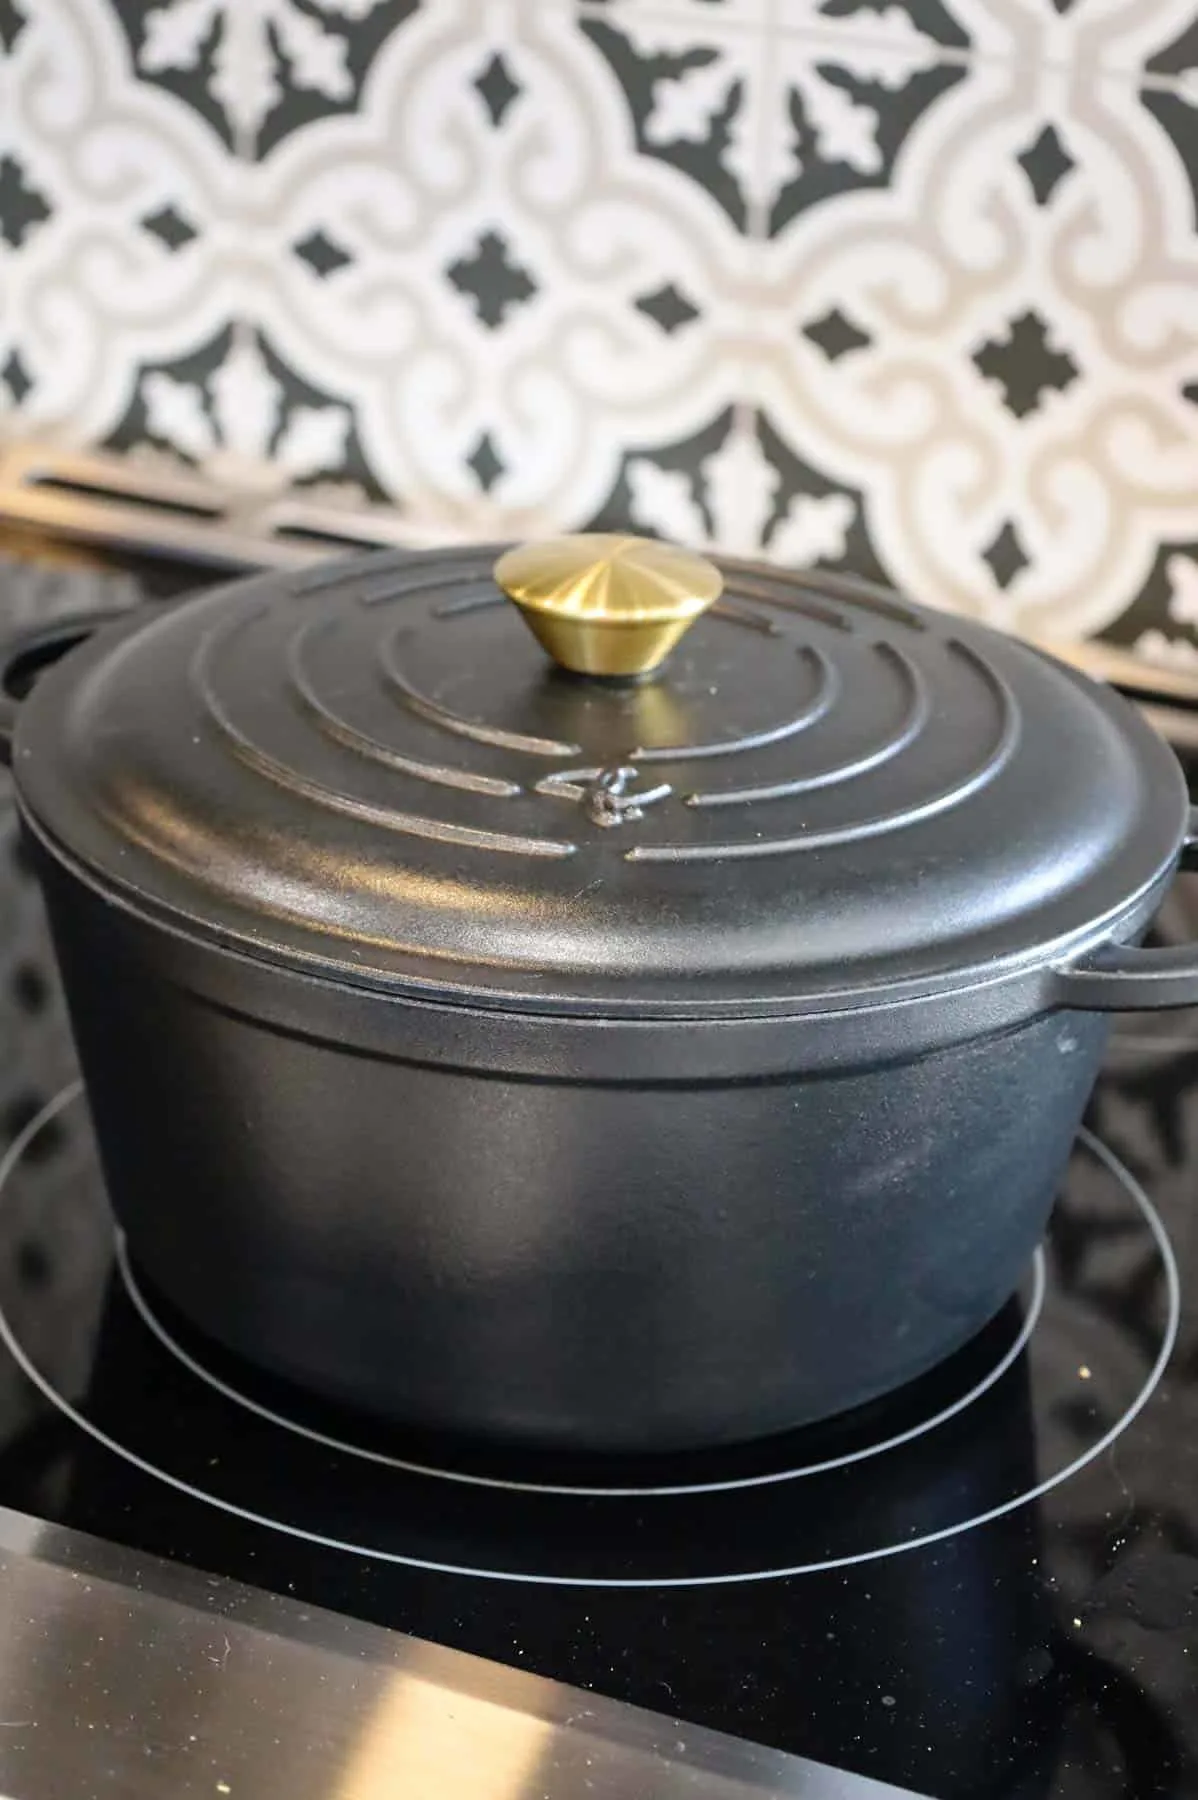 Dutch oven with lid on, on a stove